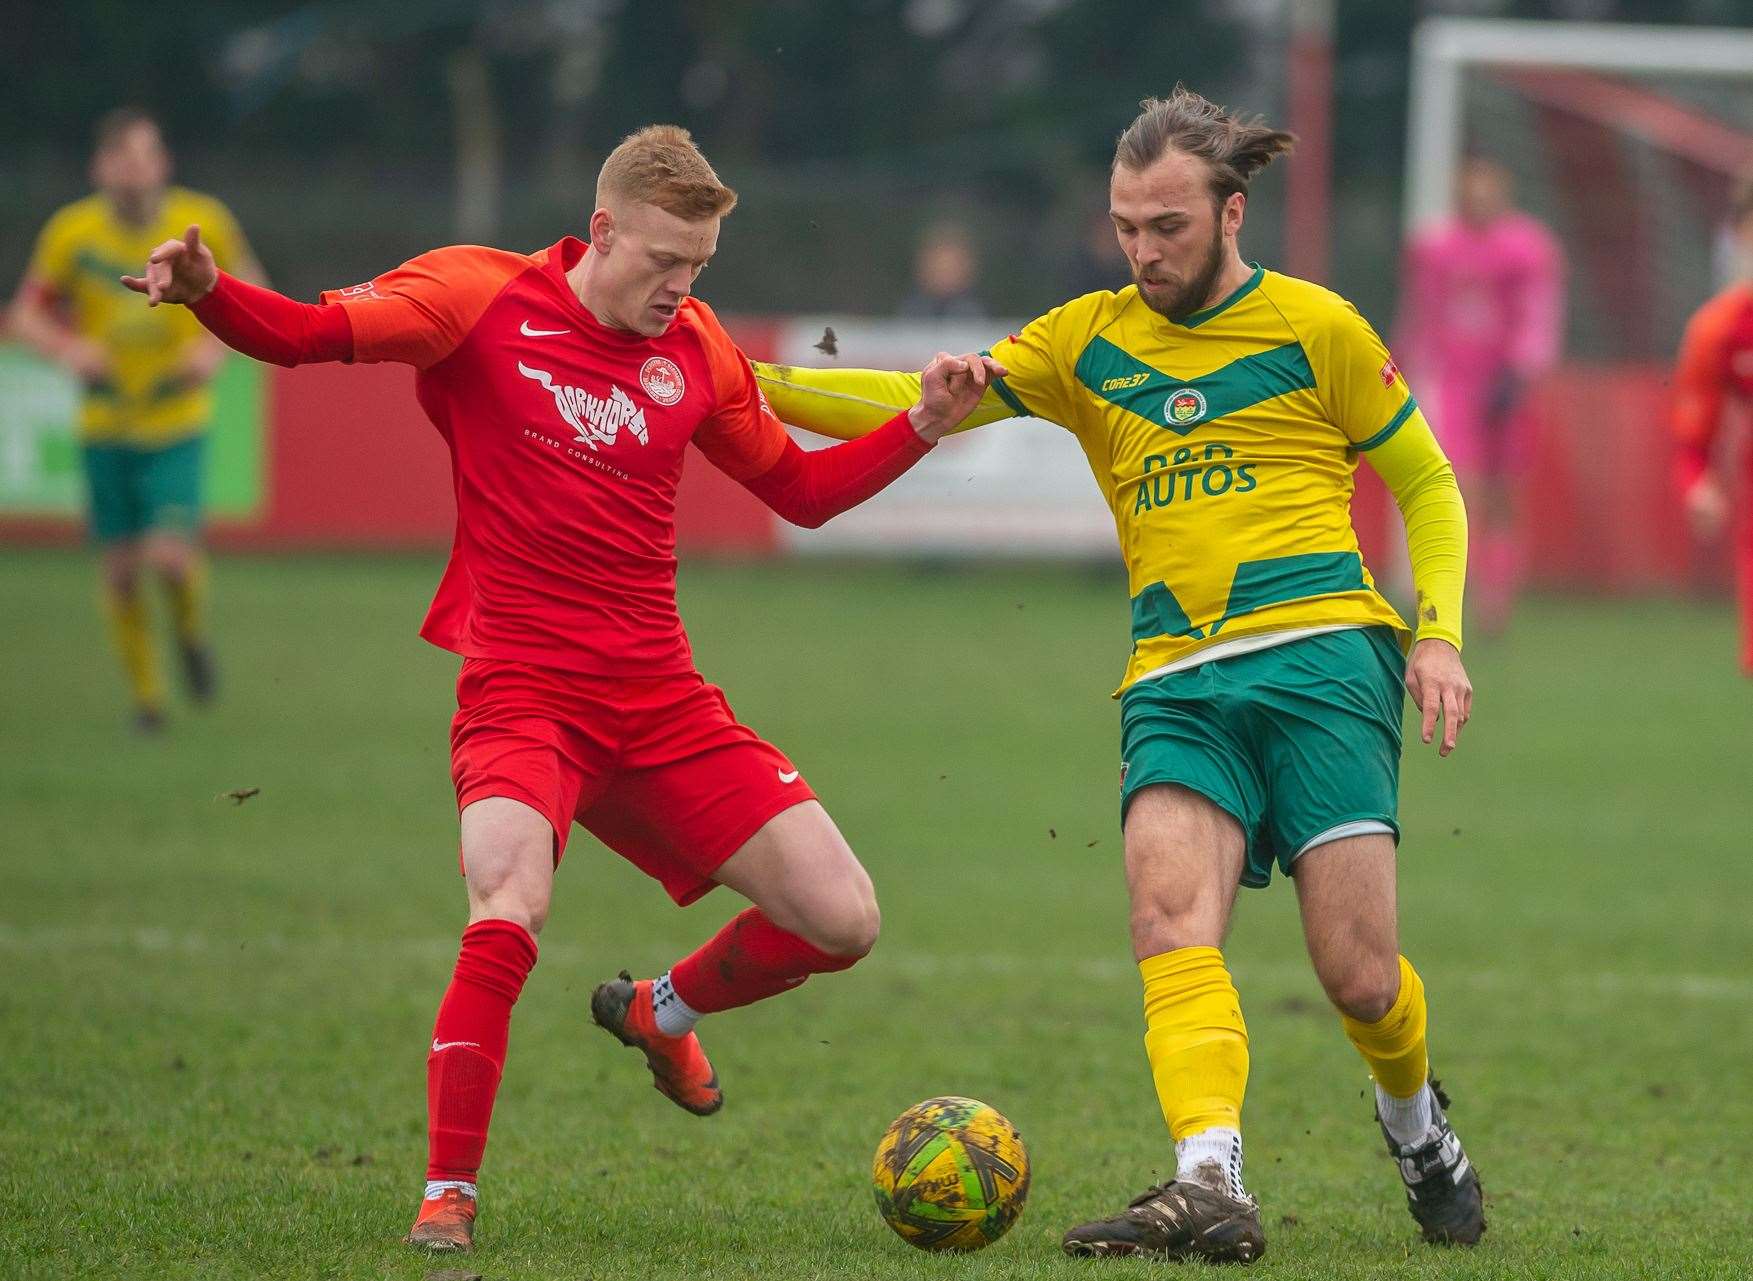 Luke Burdon continued his good form with another goal in Ashford's 2-1 victory at Hythe Picture: Ashford United